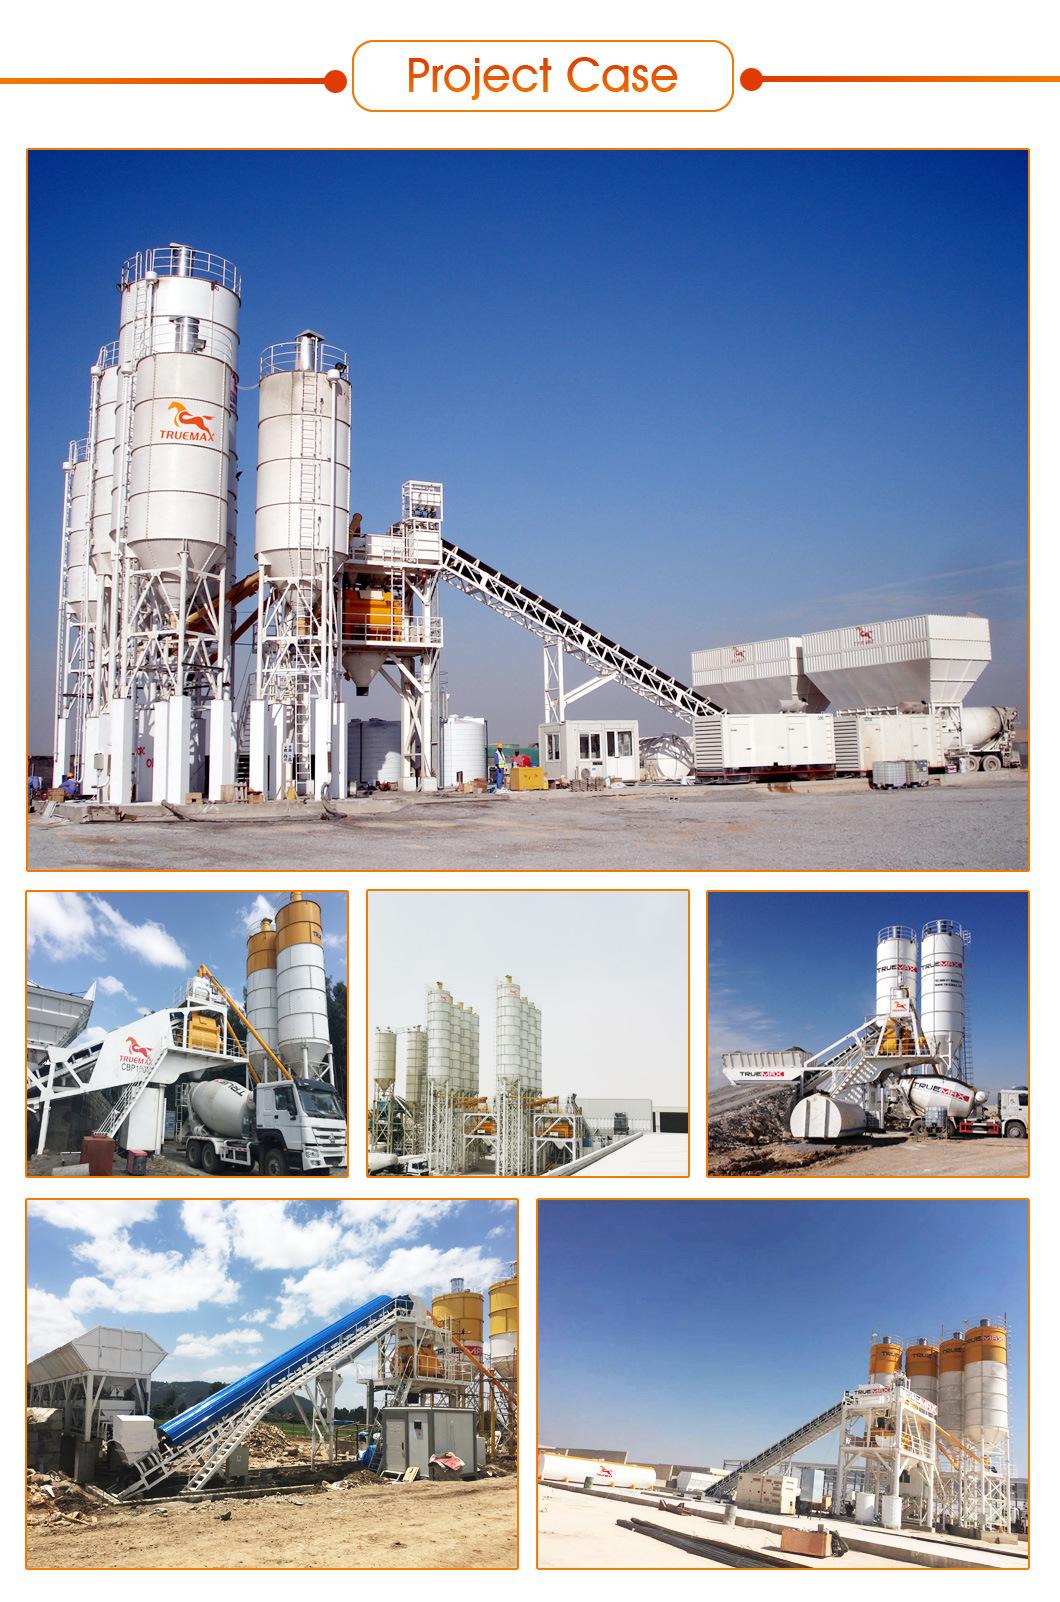 China Concrete Batching Plant with Ce Certification